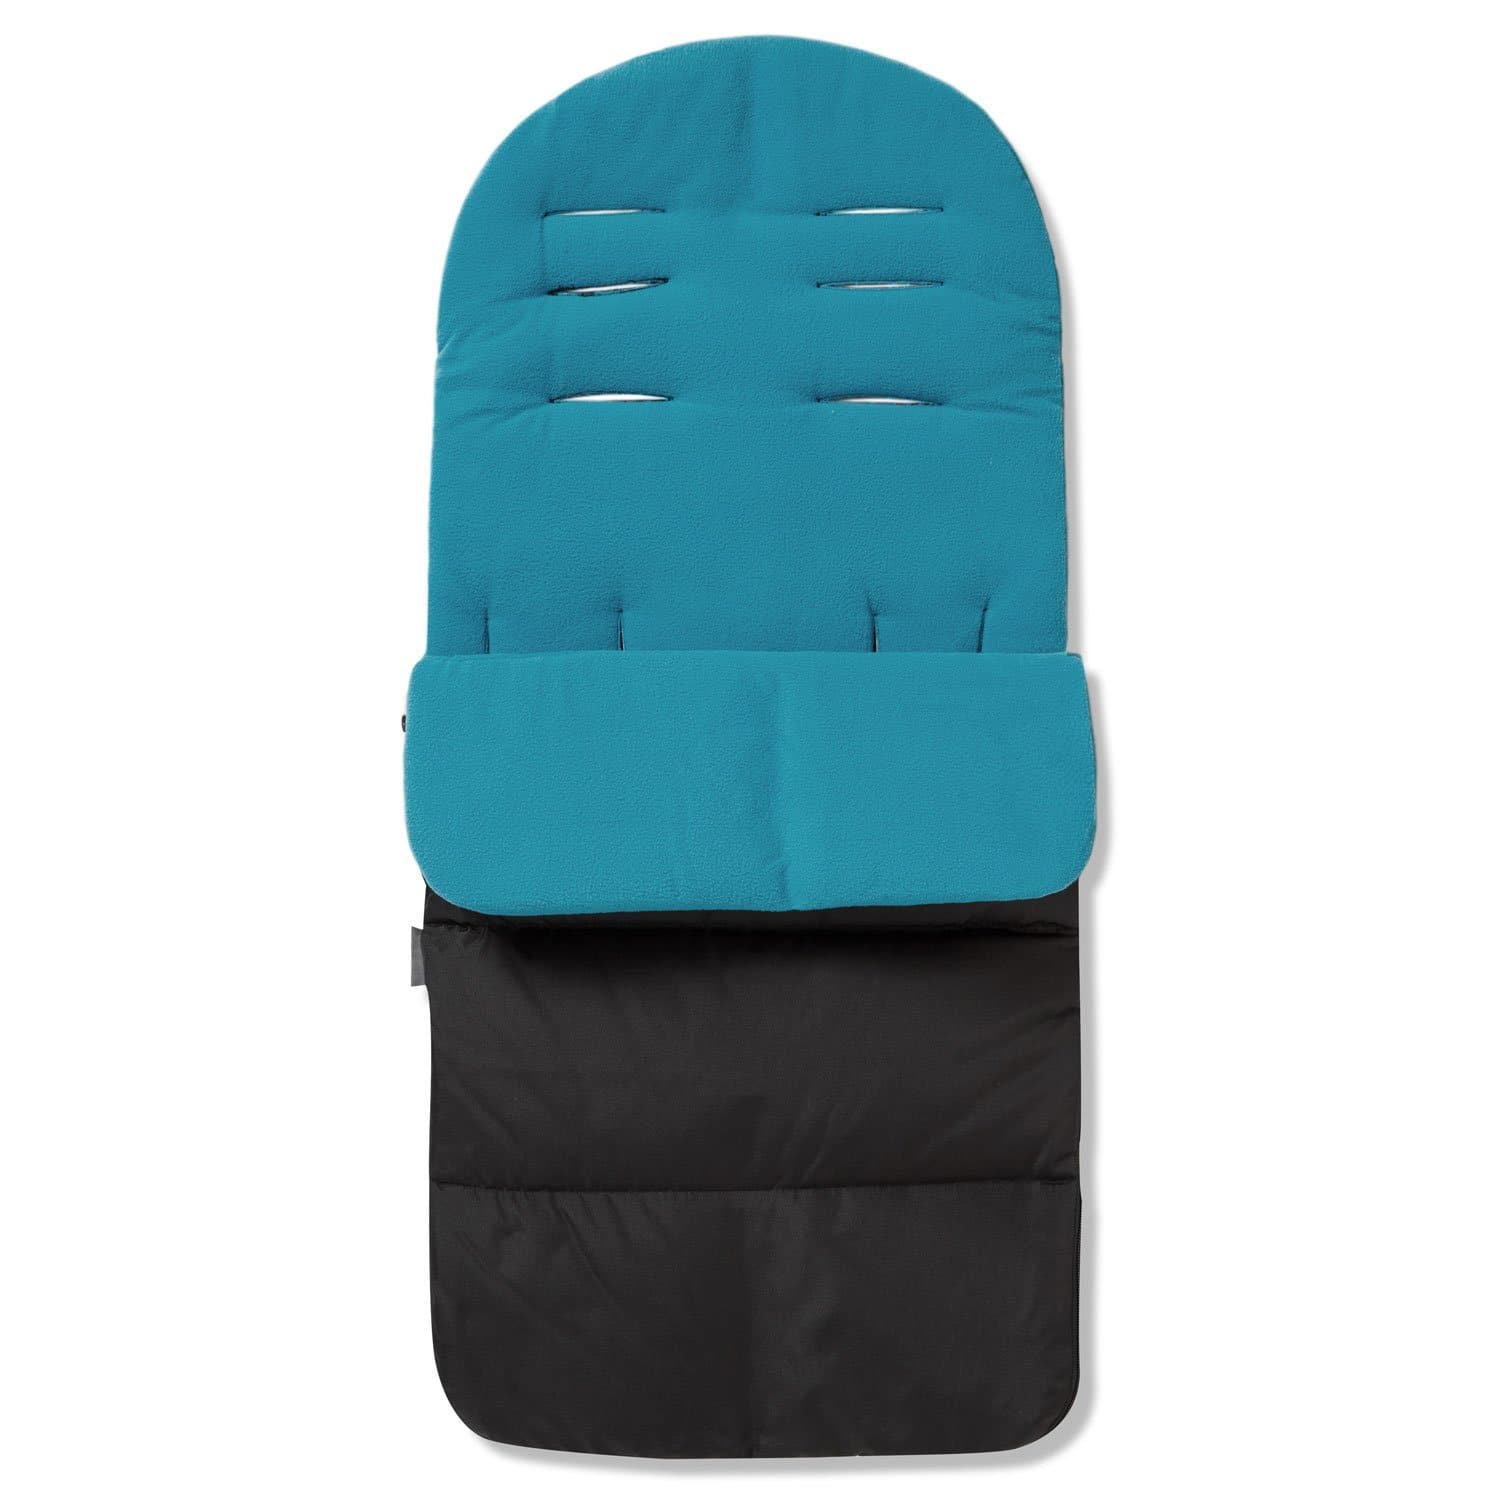 Premium Footmuff / Cosy Toes Compatible with Noukies - Ocean Blue / Fits All Models | For Your Little One